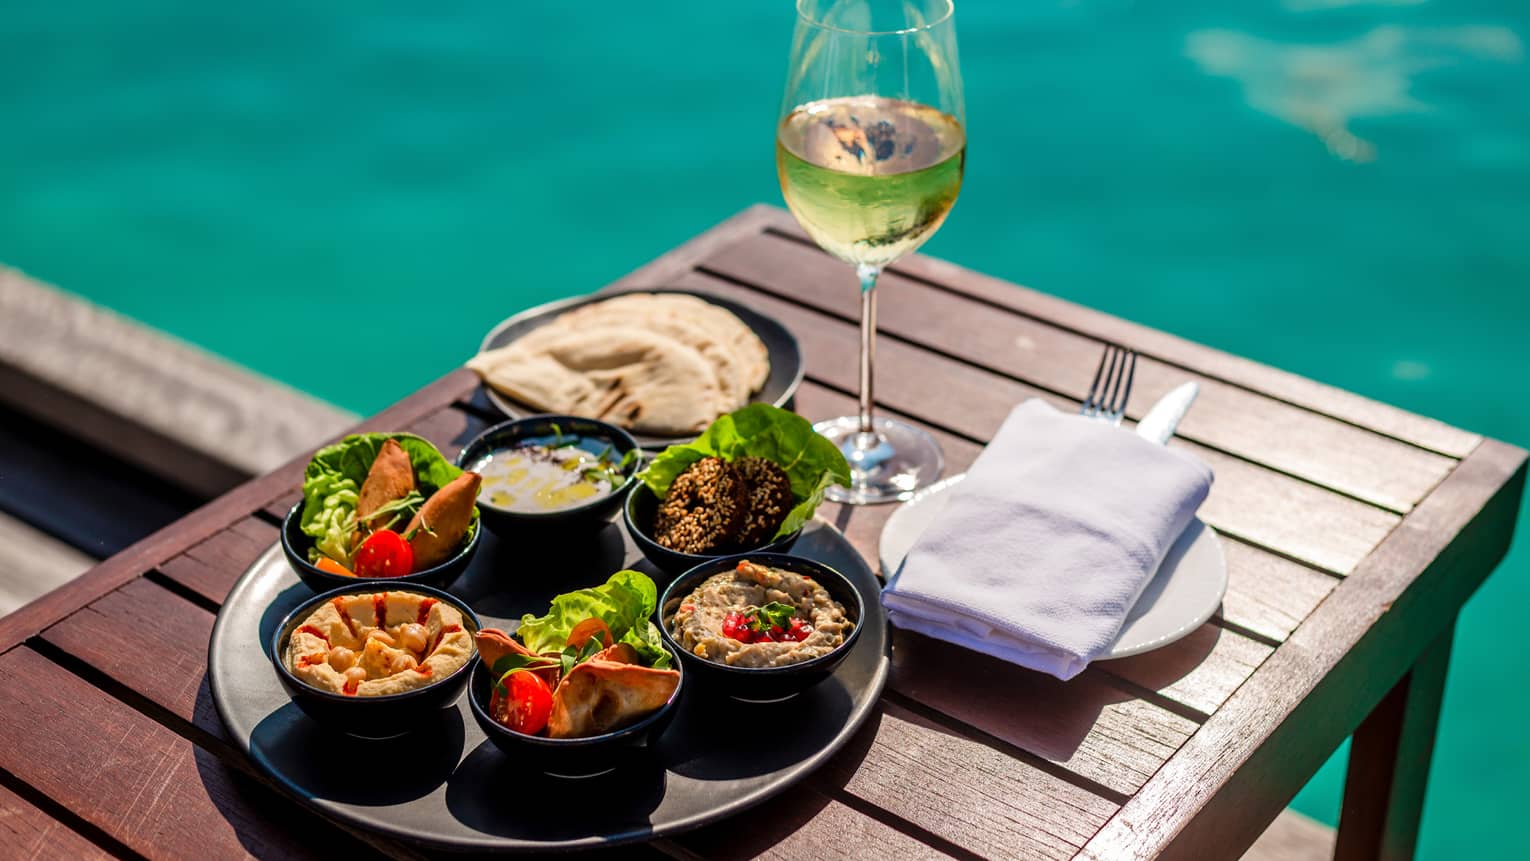 Arabic mezze platter and glass of white wine on poolside table